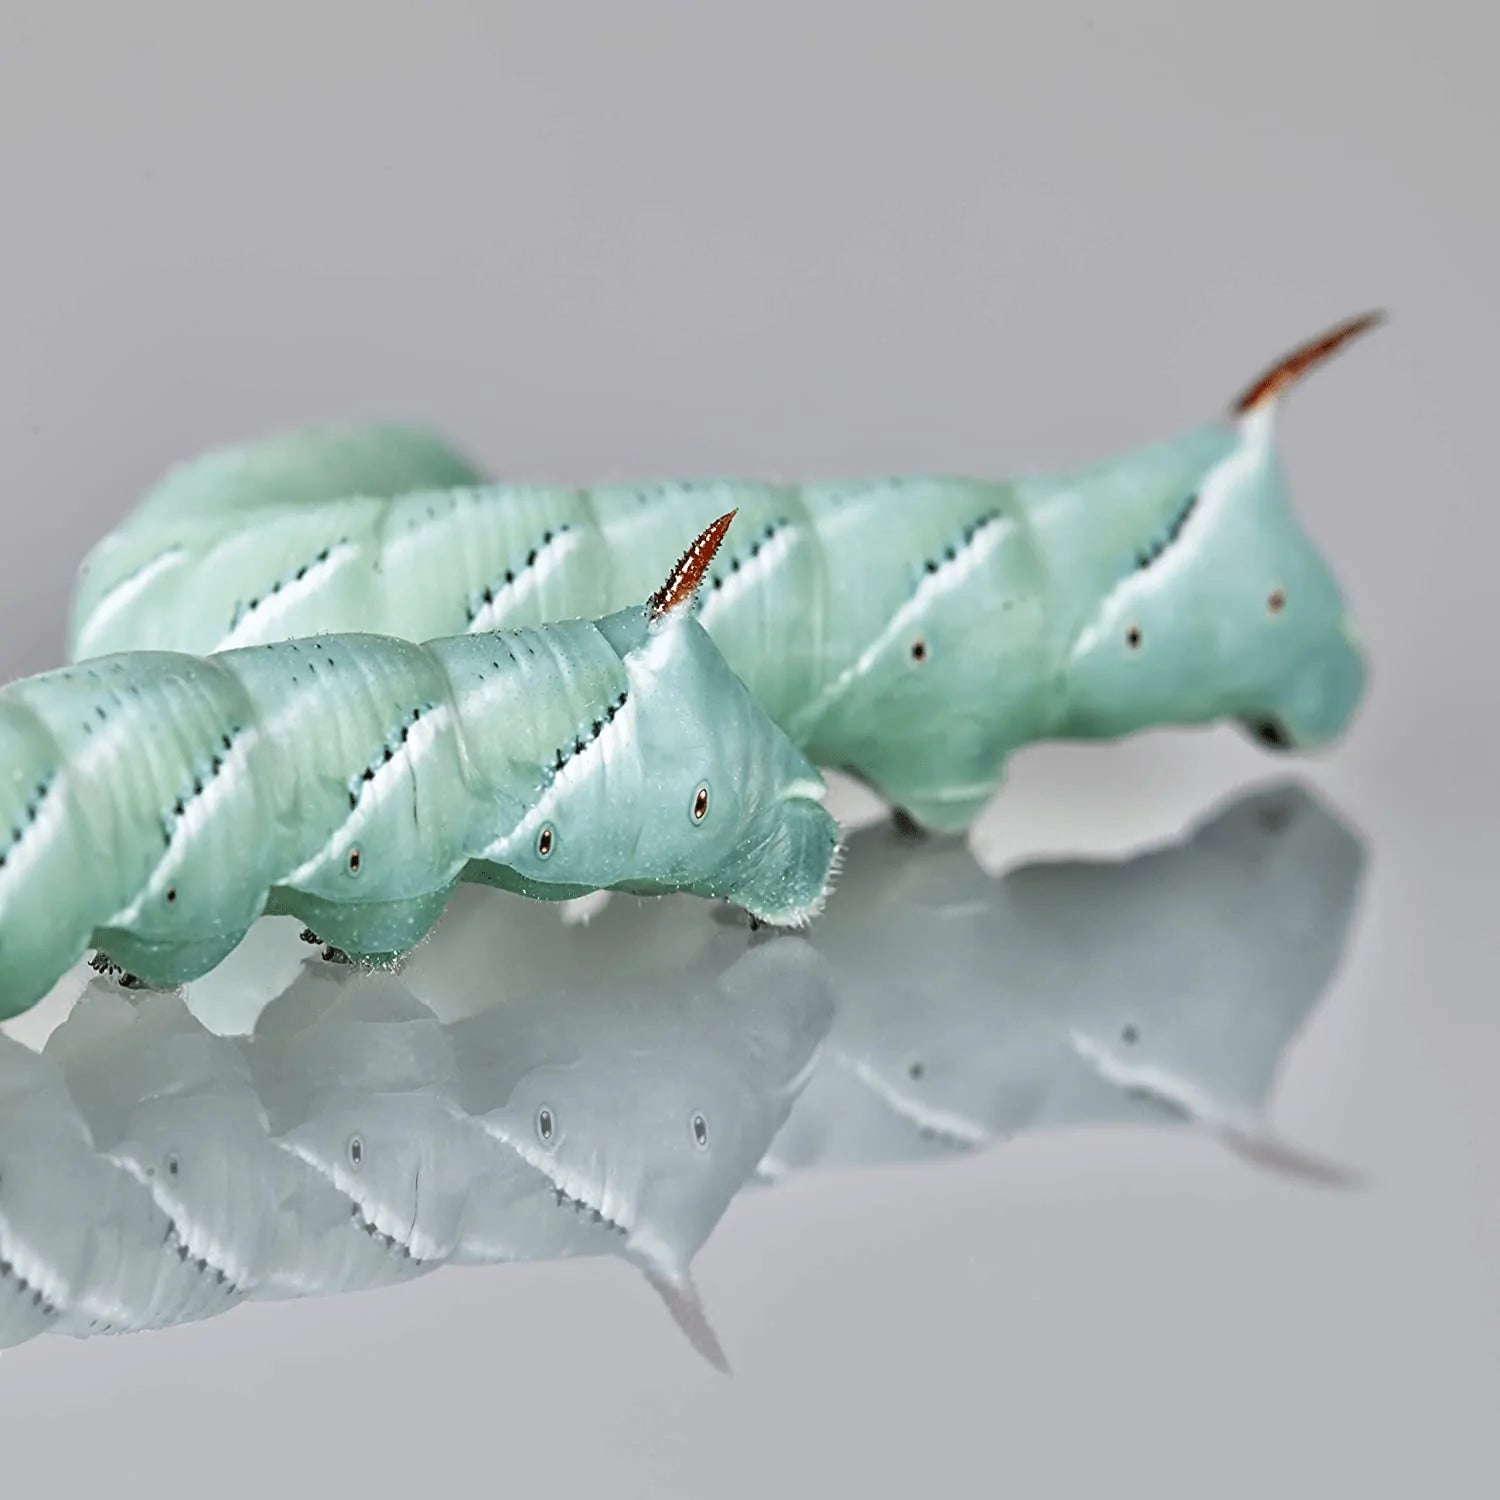 Dbdpet Premium 10-15 Live Hornworms - Food for Bearded Dragons, Leopard Geckos, Frogs, Chameleons, Tegus, and Other Reptiles! Animals & Pet Supplies > Pet Supplies > Reptile & Amphibian Supplies > Reptile & Amphibian Food DBDPet   